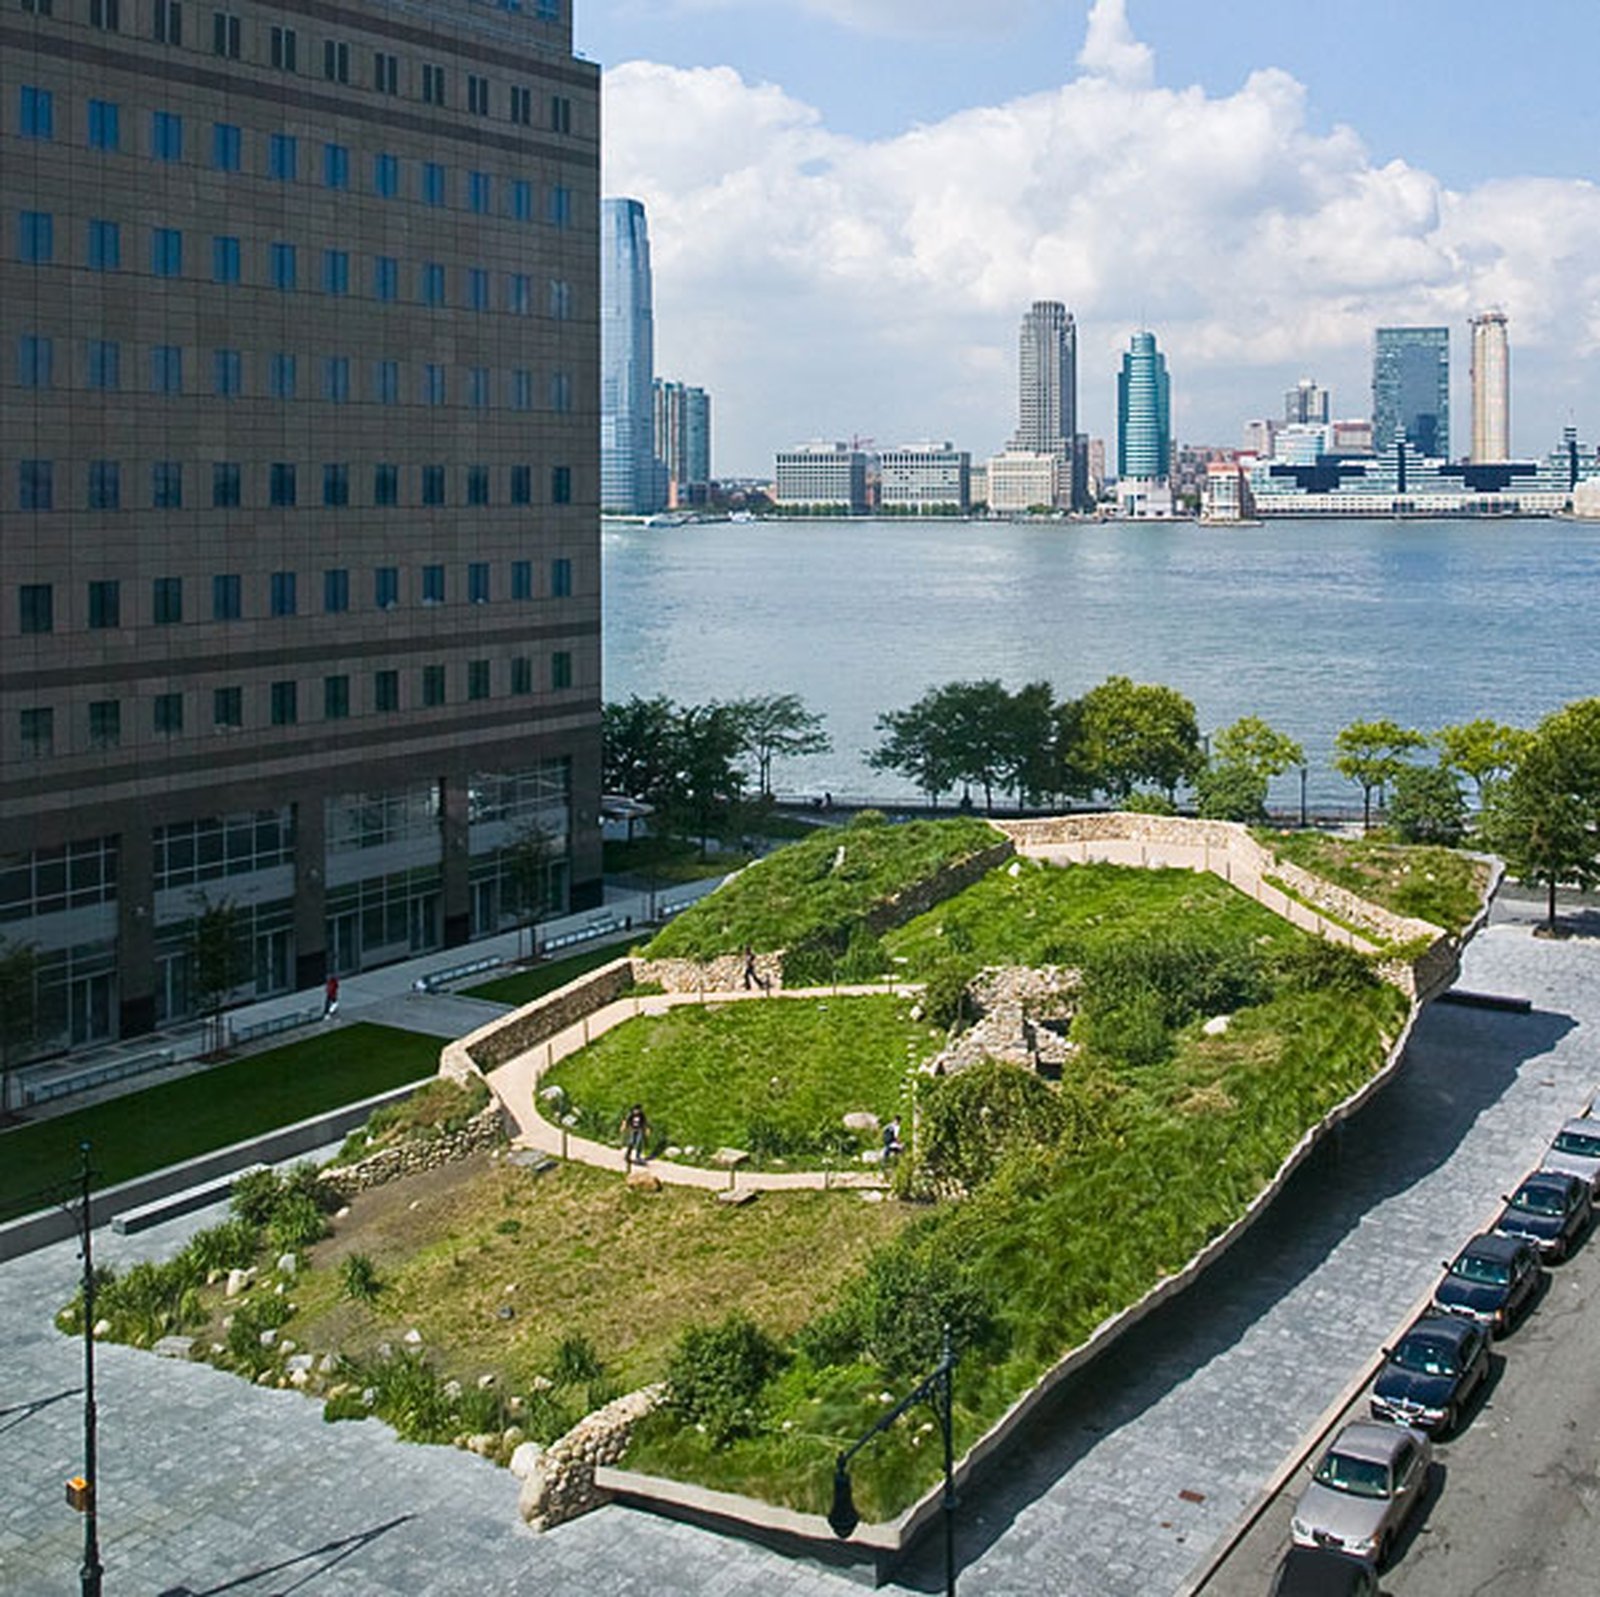 Image - The Irish Hunger Memorial in Battery Park, New York, designed by Brian Tolle and opened in 2002.